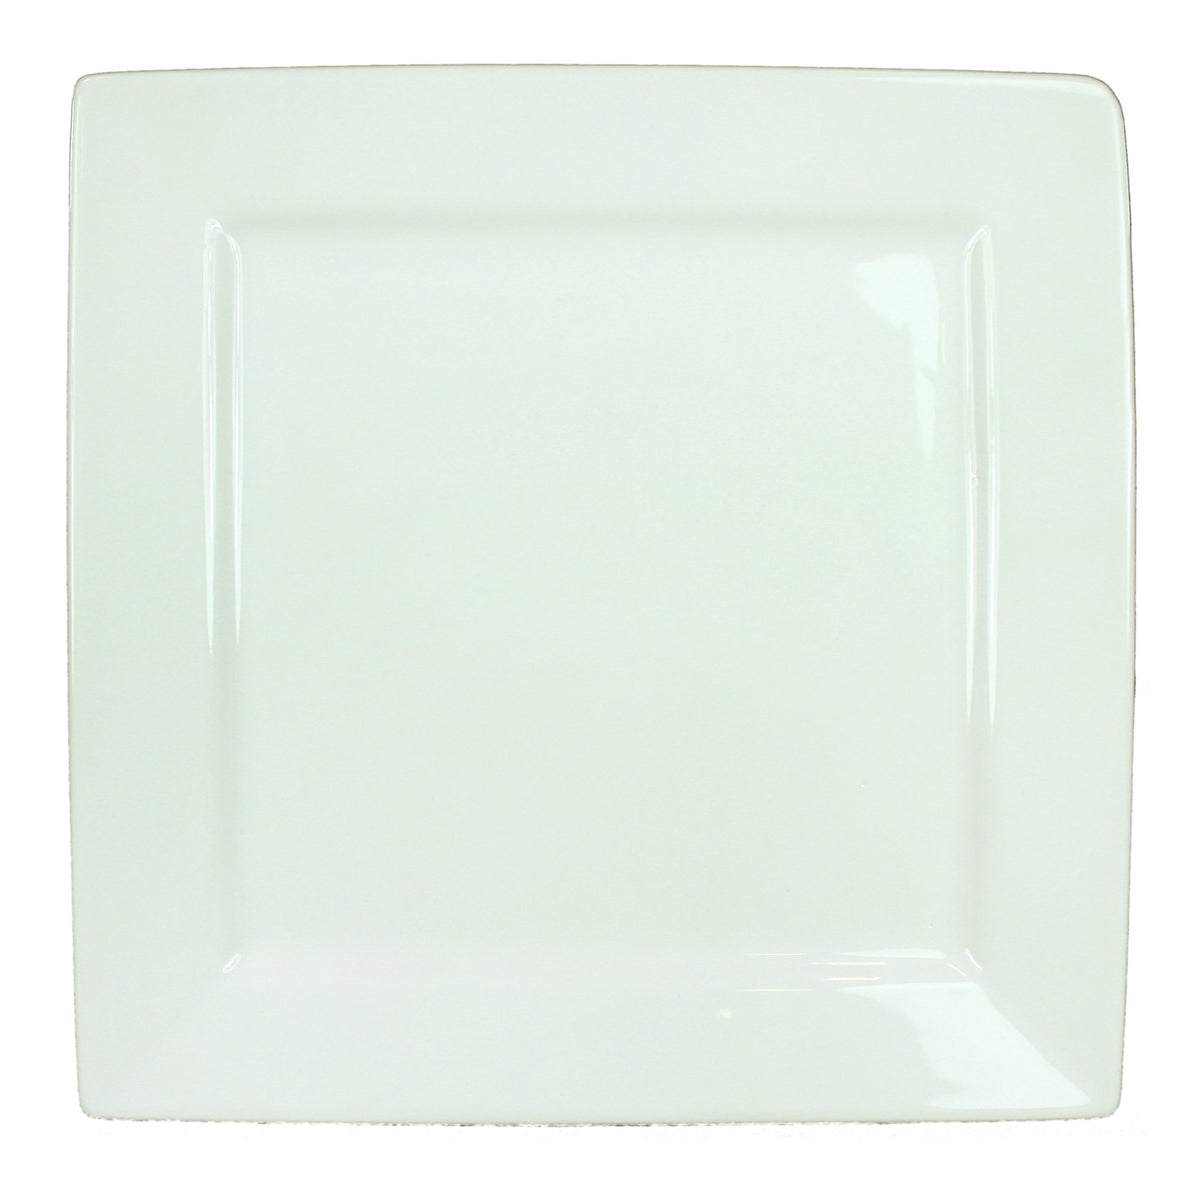 Well Designed Square Shape Ceramic Plate with Curved Rims, White - BM187861